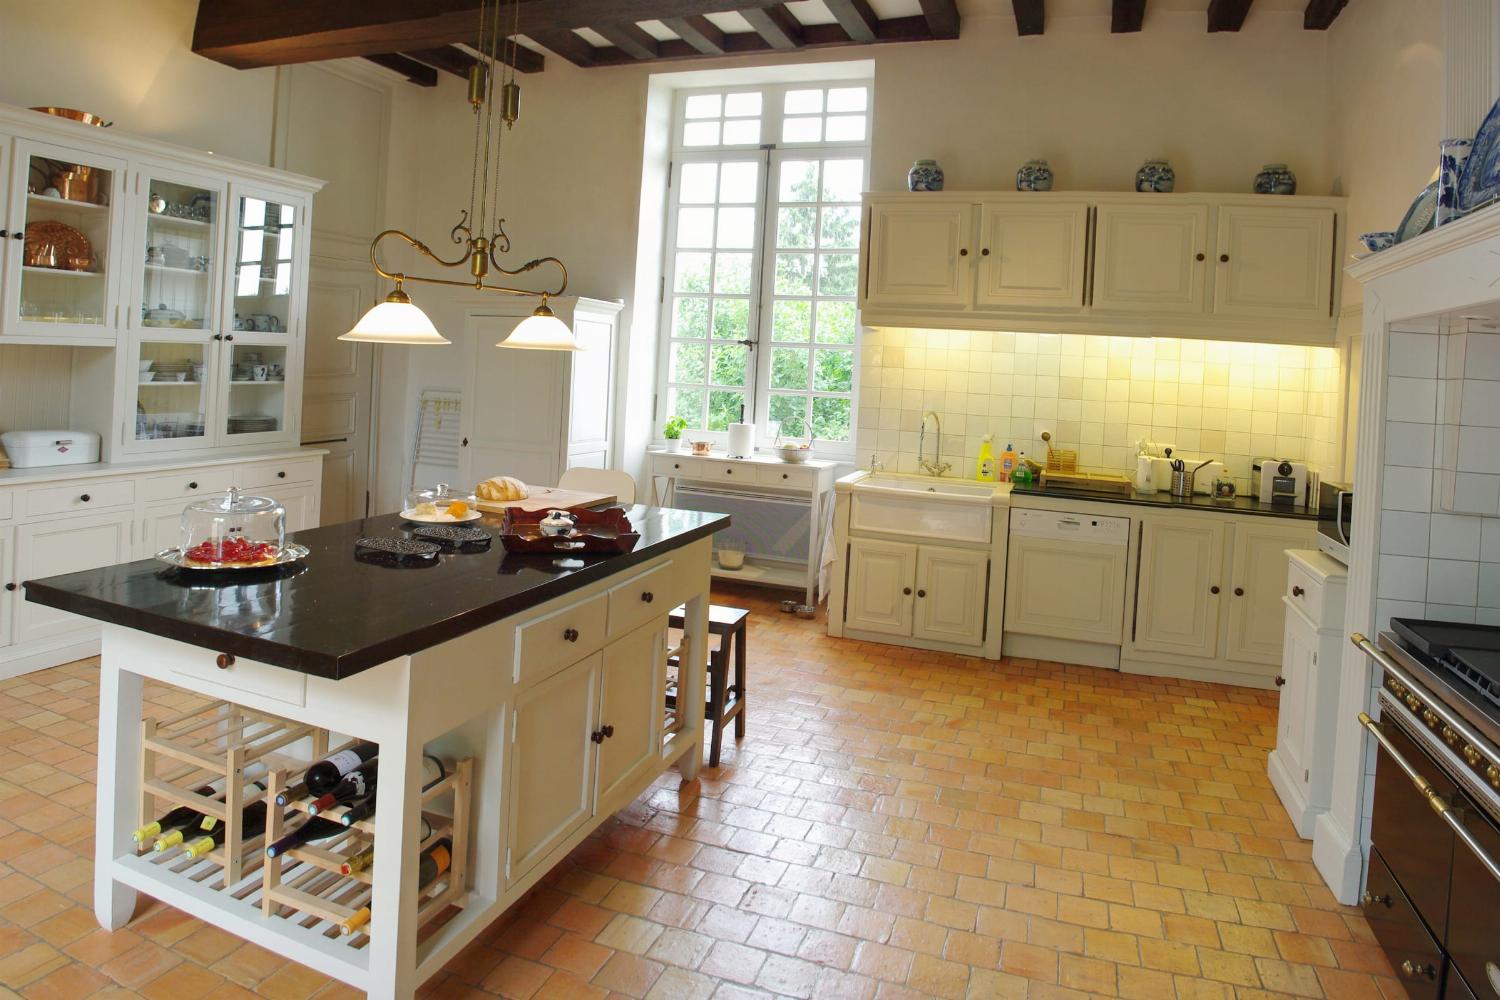 Kitchen | Holiday accommodation in the Loire Valley